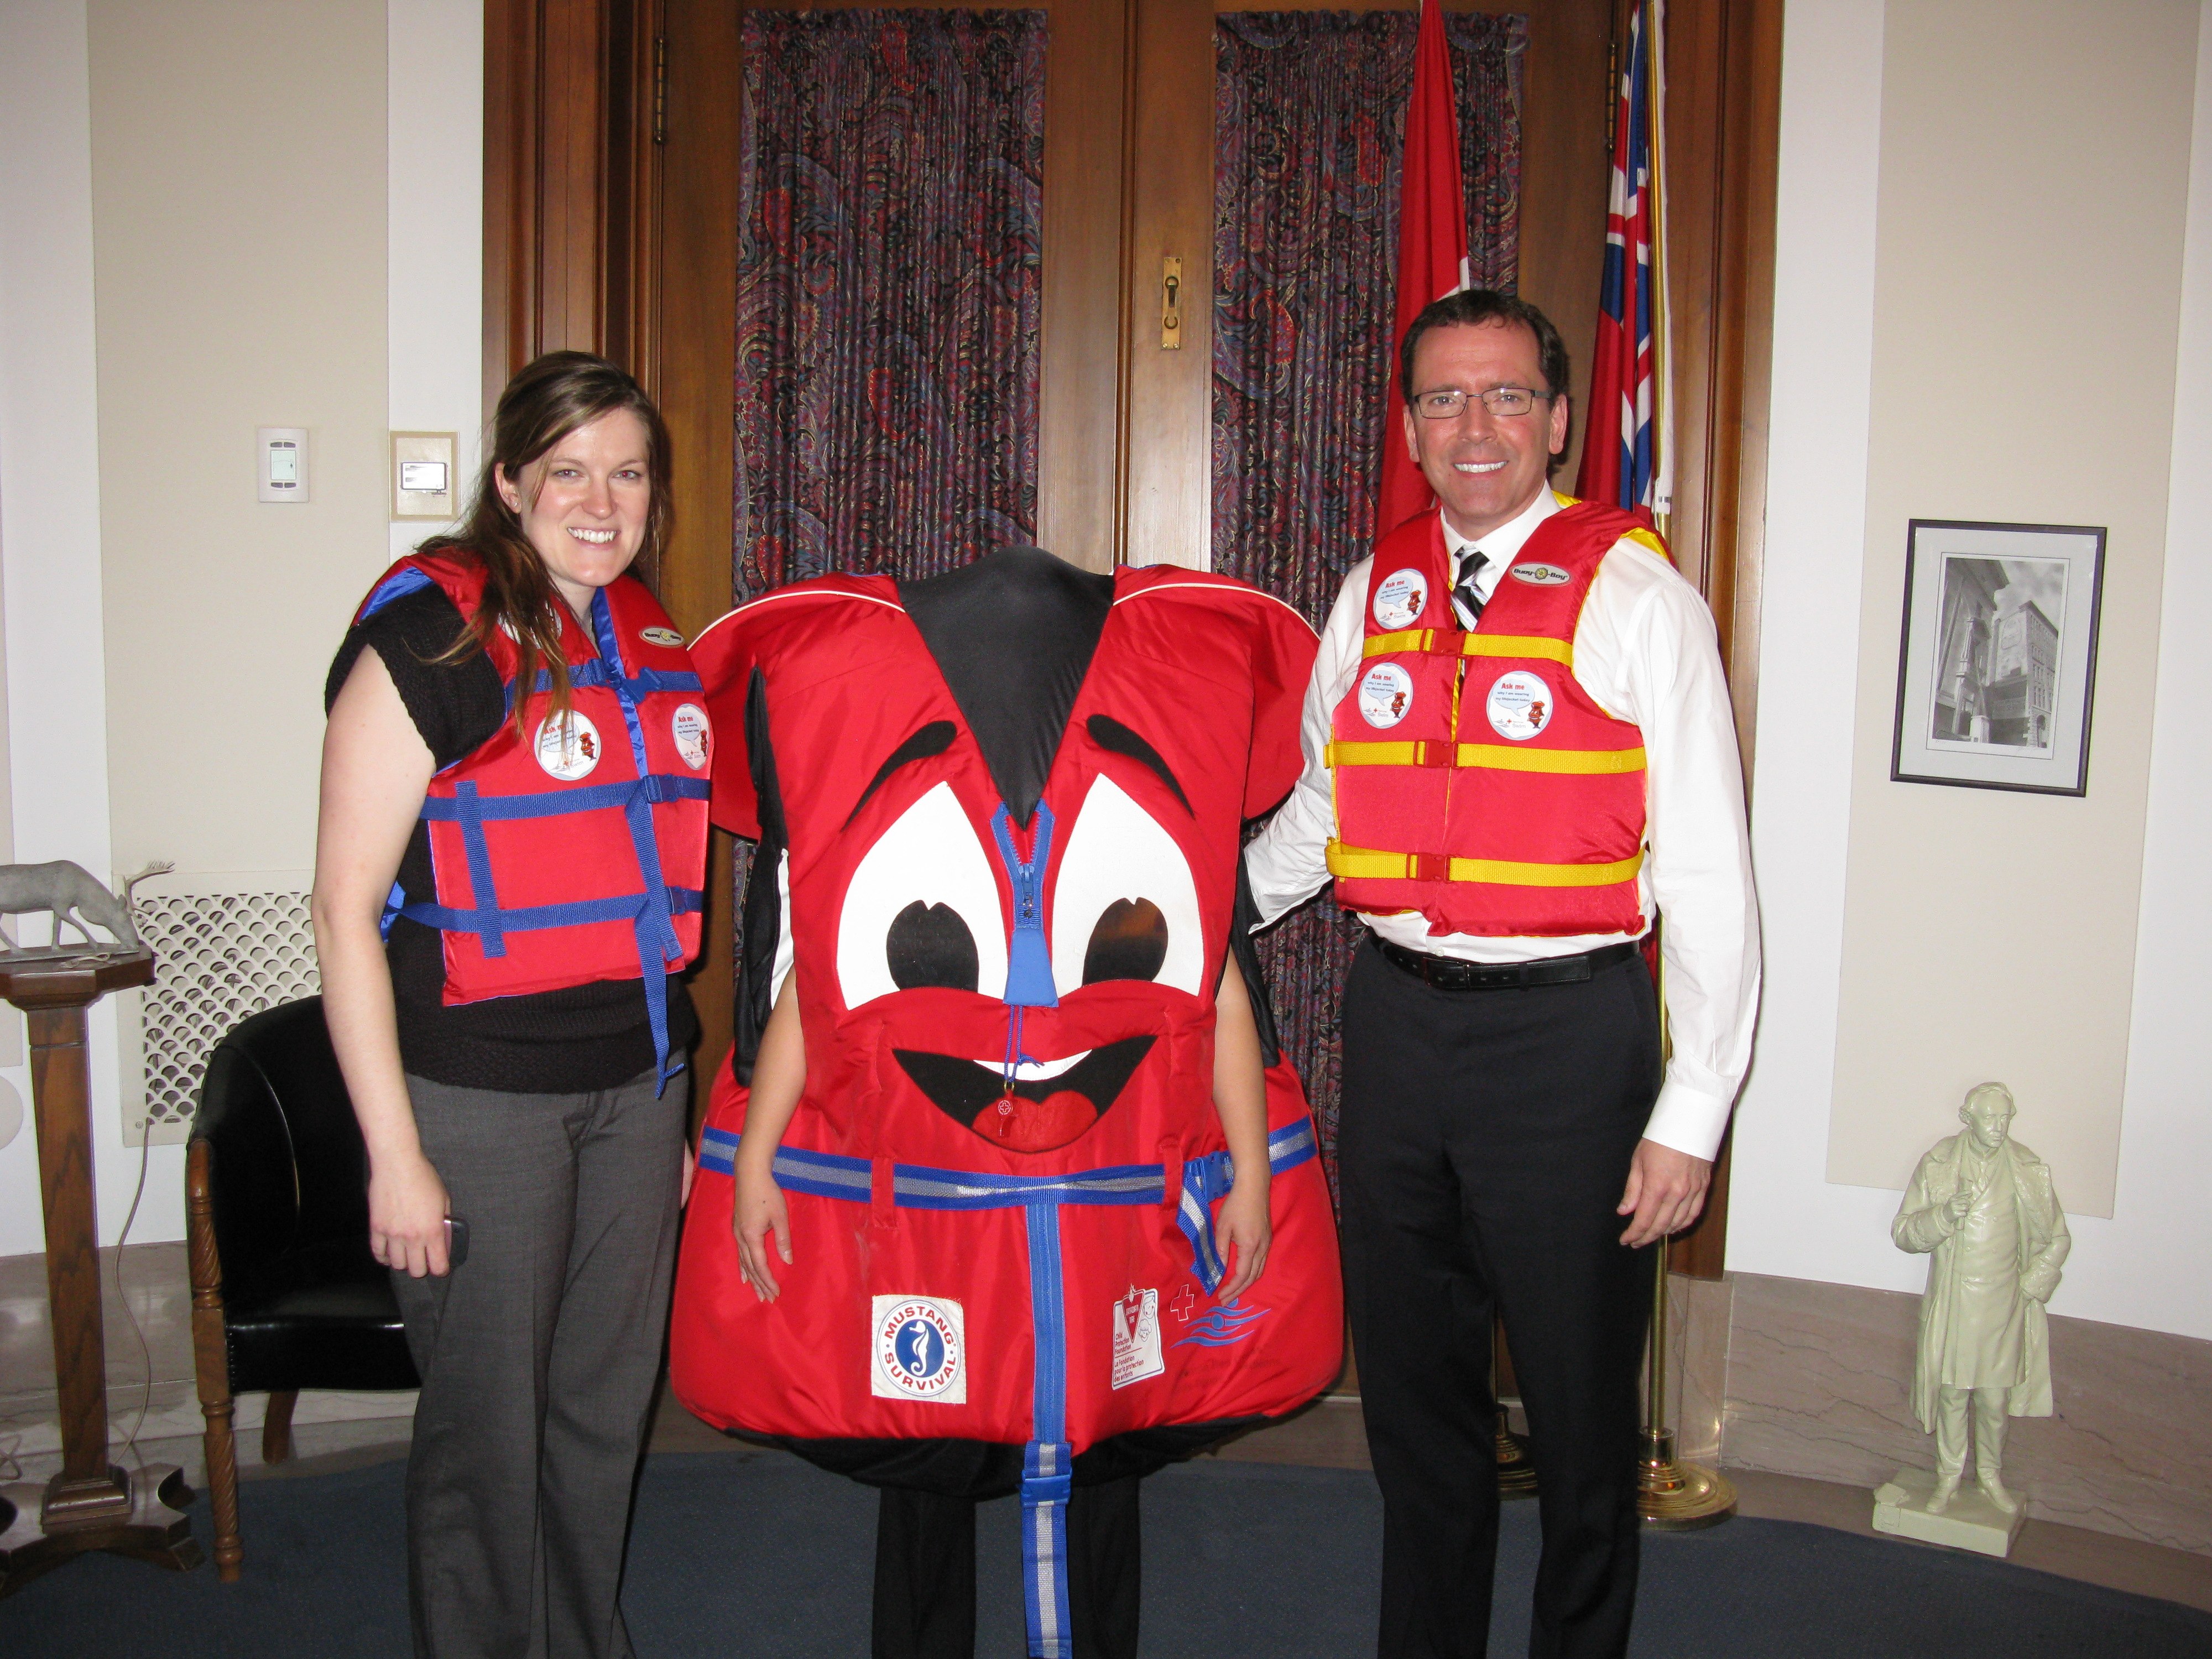 Western Canada offices ham it up for National Lifejacket